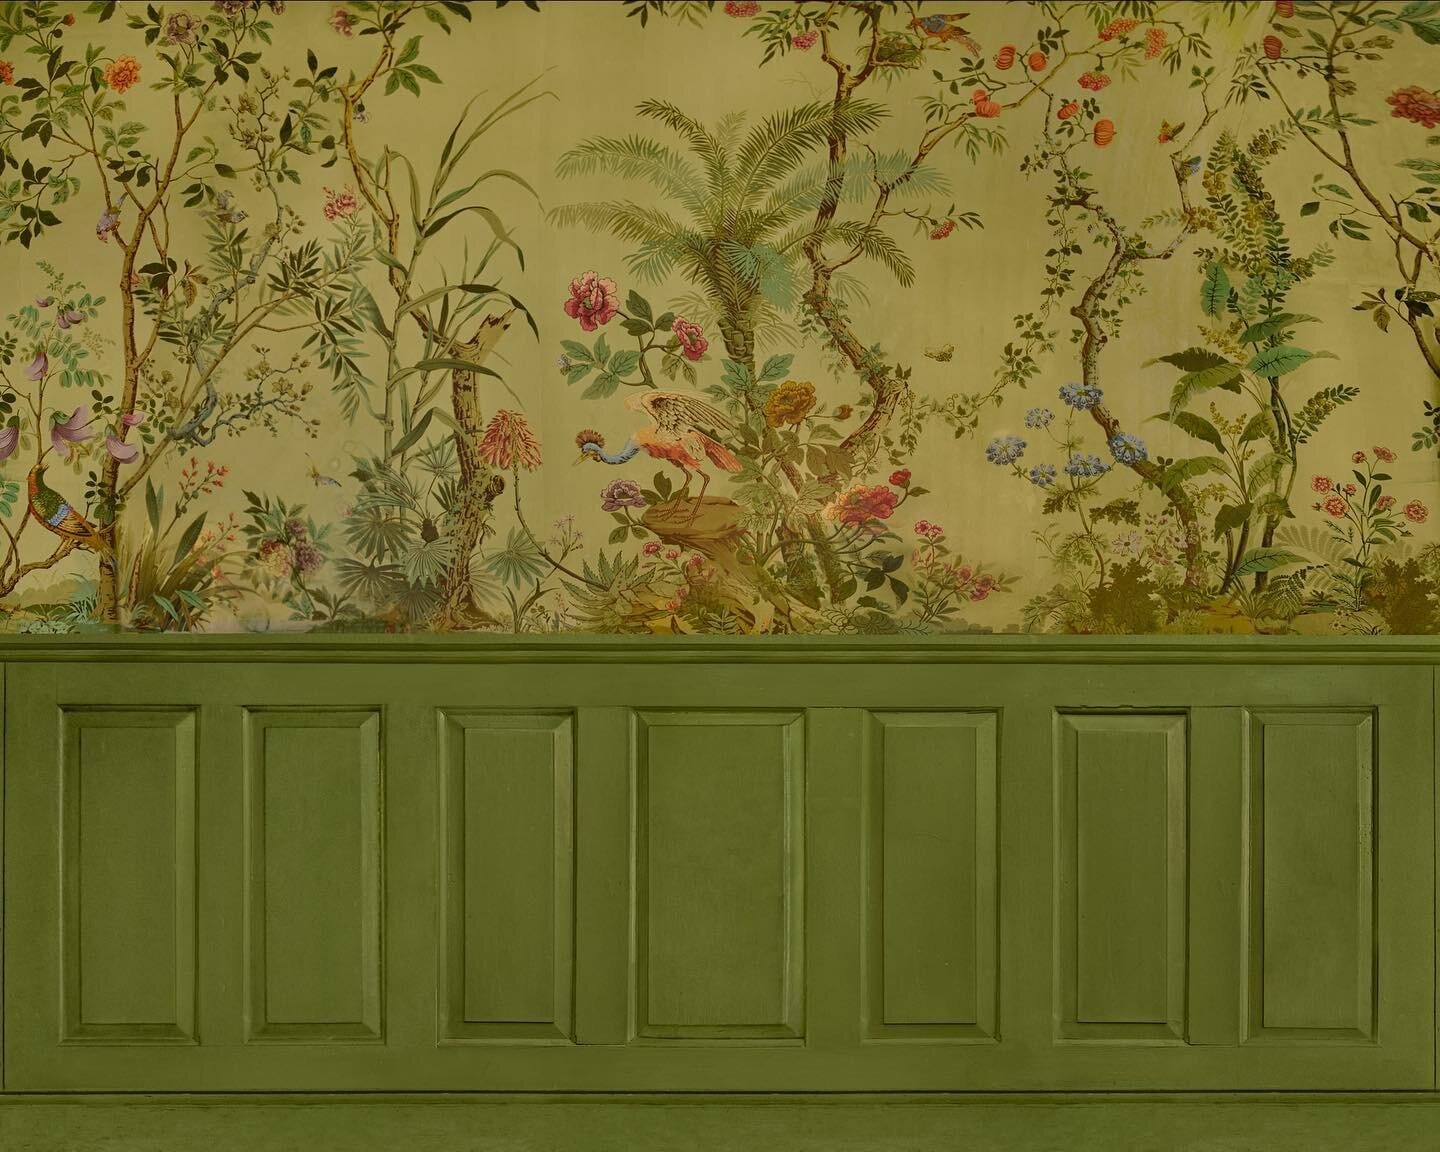 Colonial Wallpaper from the upcoming Architectural Collection 💚
#thebackdropstudio #Architecturalbackdrops #fineartbackdrops #colonialbackdrop #colonialwallpaper #bespokenackdrop #printedbackdrop #painterlybackdrop #woodpaneling